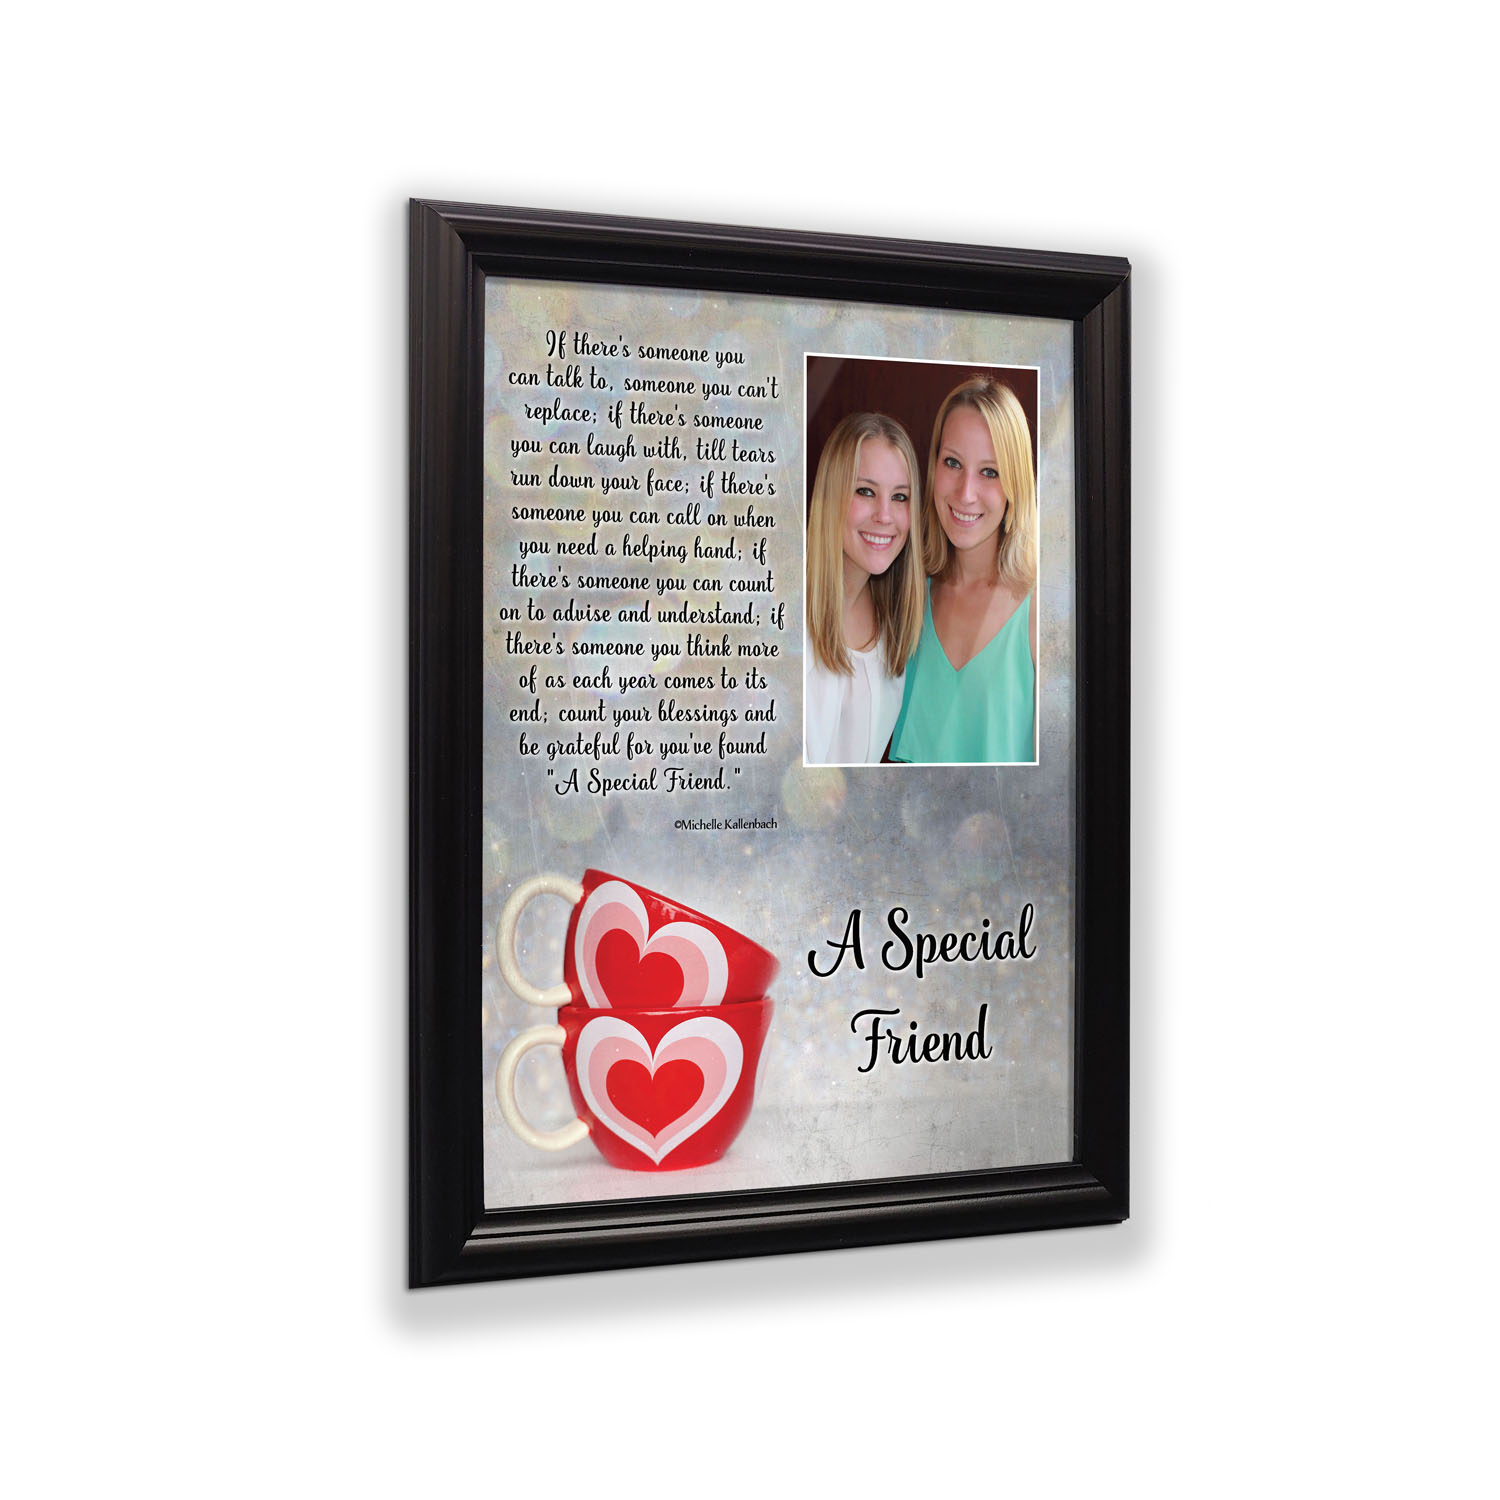 Best Friend Gifts, Birthday Gift for Best Friend, Friendship Gift for  Women, Thank You Gifts for Friends, Thinking of You Gifts for Friends Going  Away, A Special Friendship Picture Frame, 5003B 